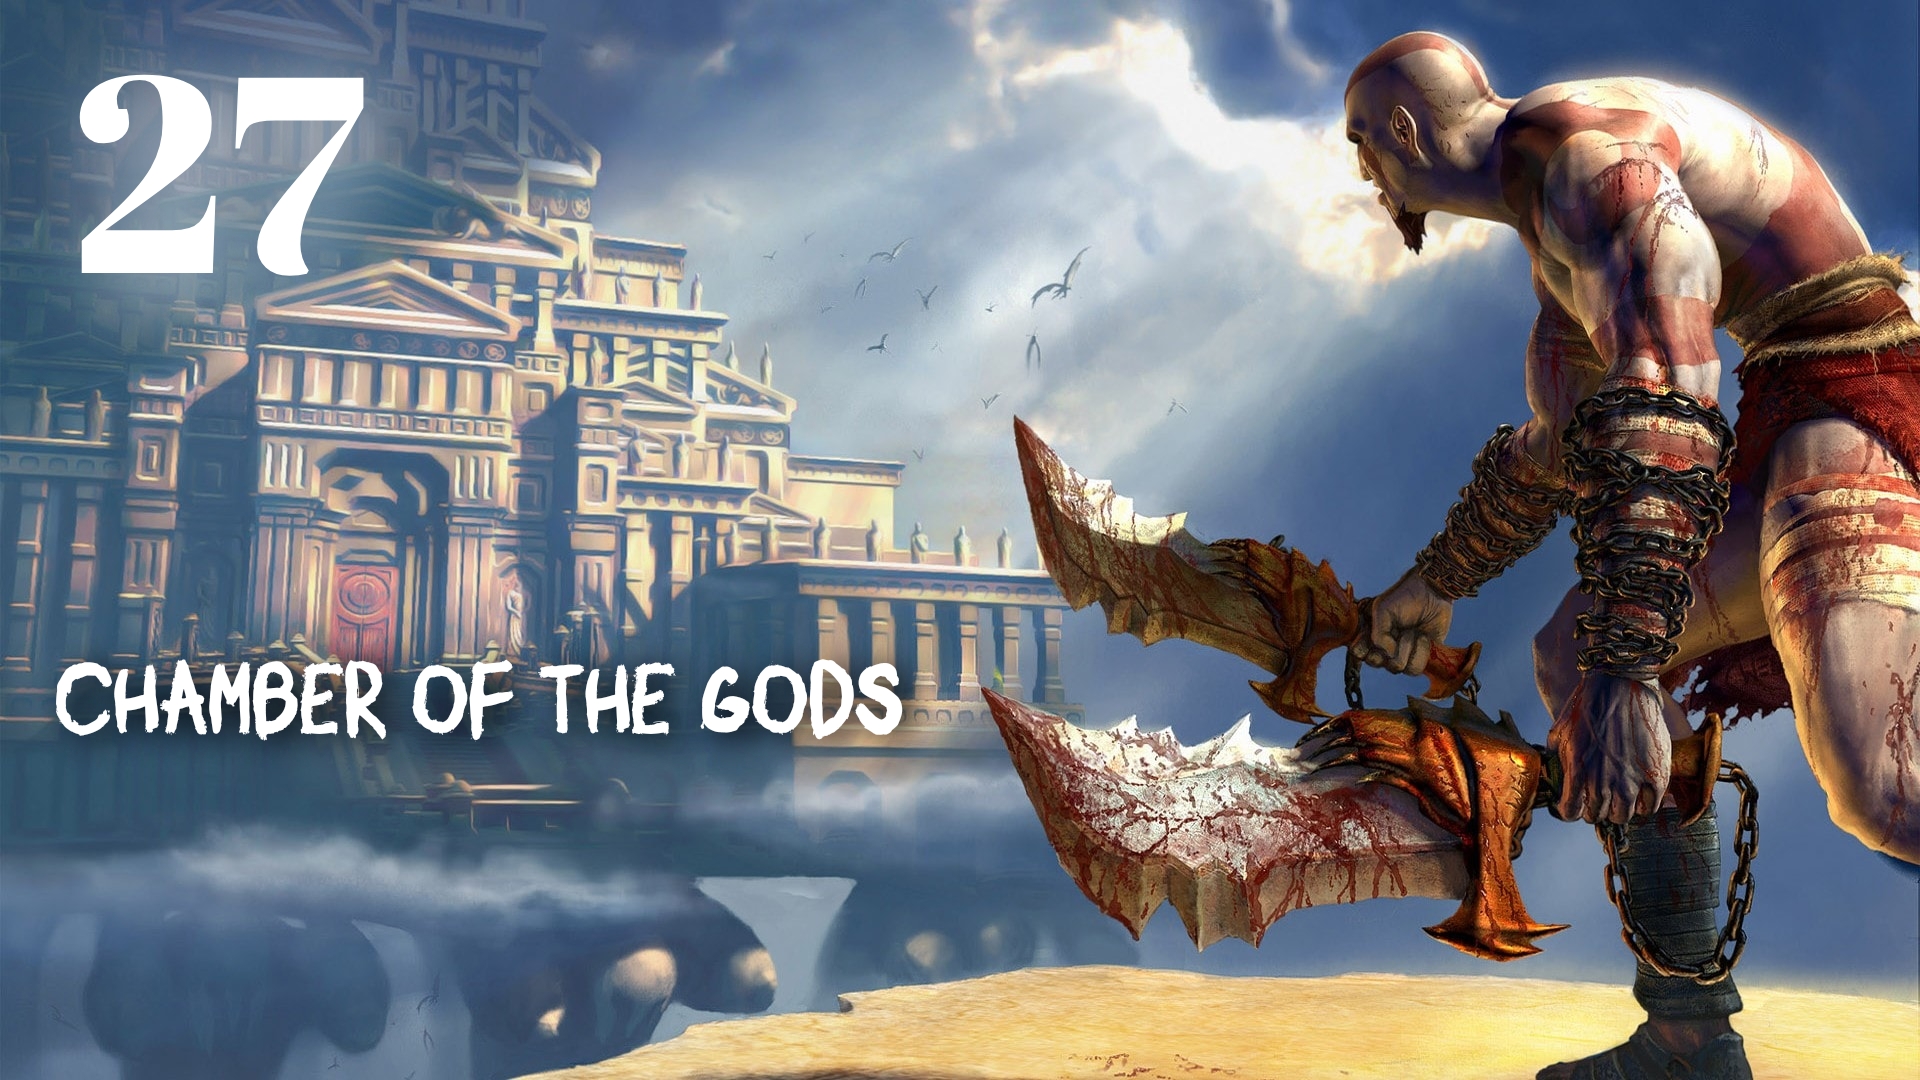 God of War HD The Challenge of Hades: Chamber of the Gods